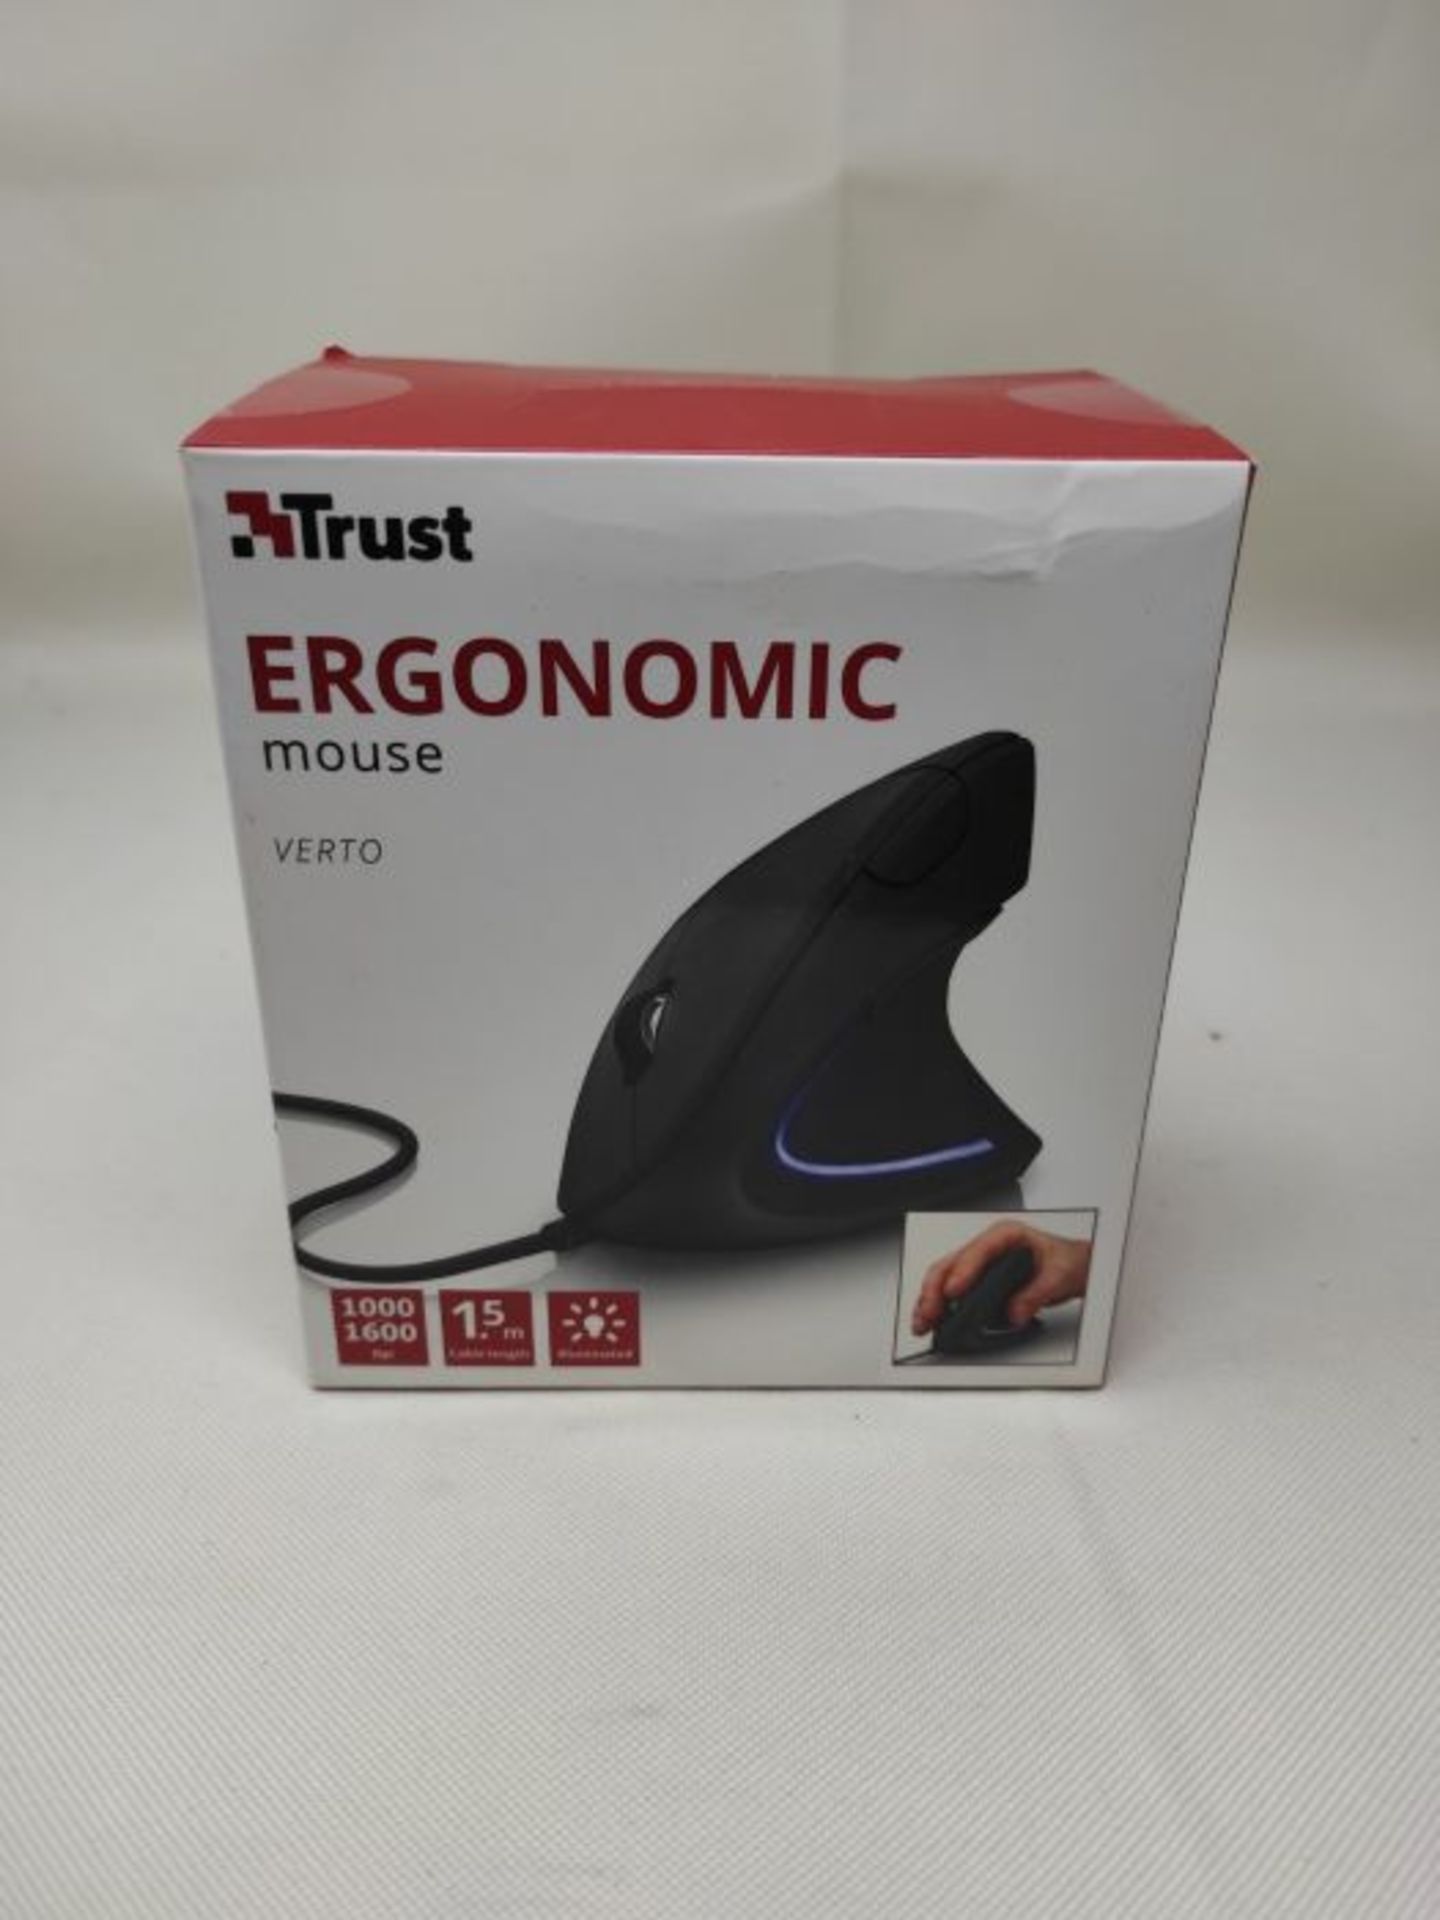 Trust 22885 Verto Wired Ergonomic Mouse for PC and Laptop, Illuminated, 1000-1600 DPI, - Image 2 of 3